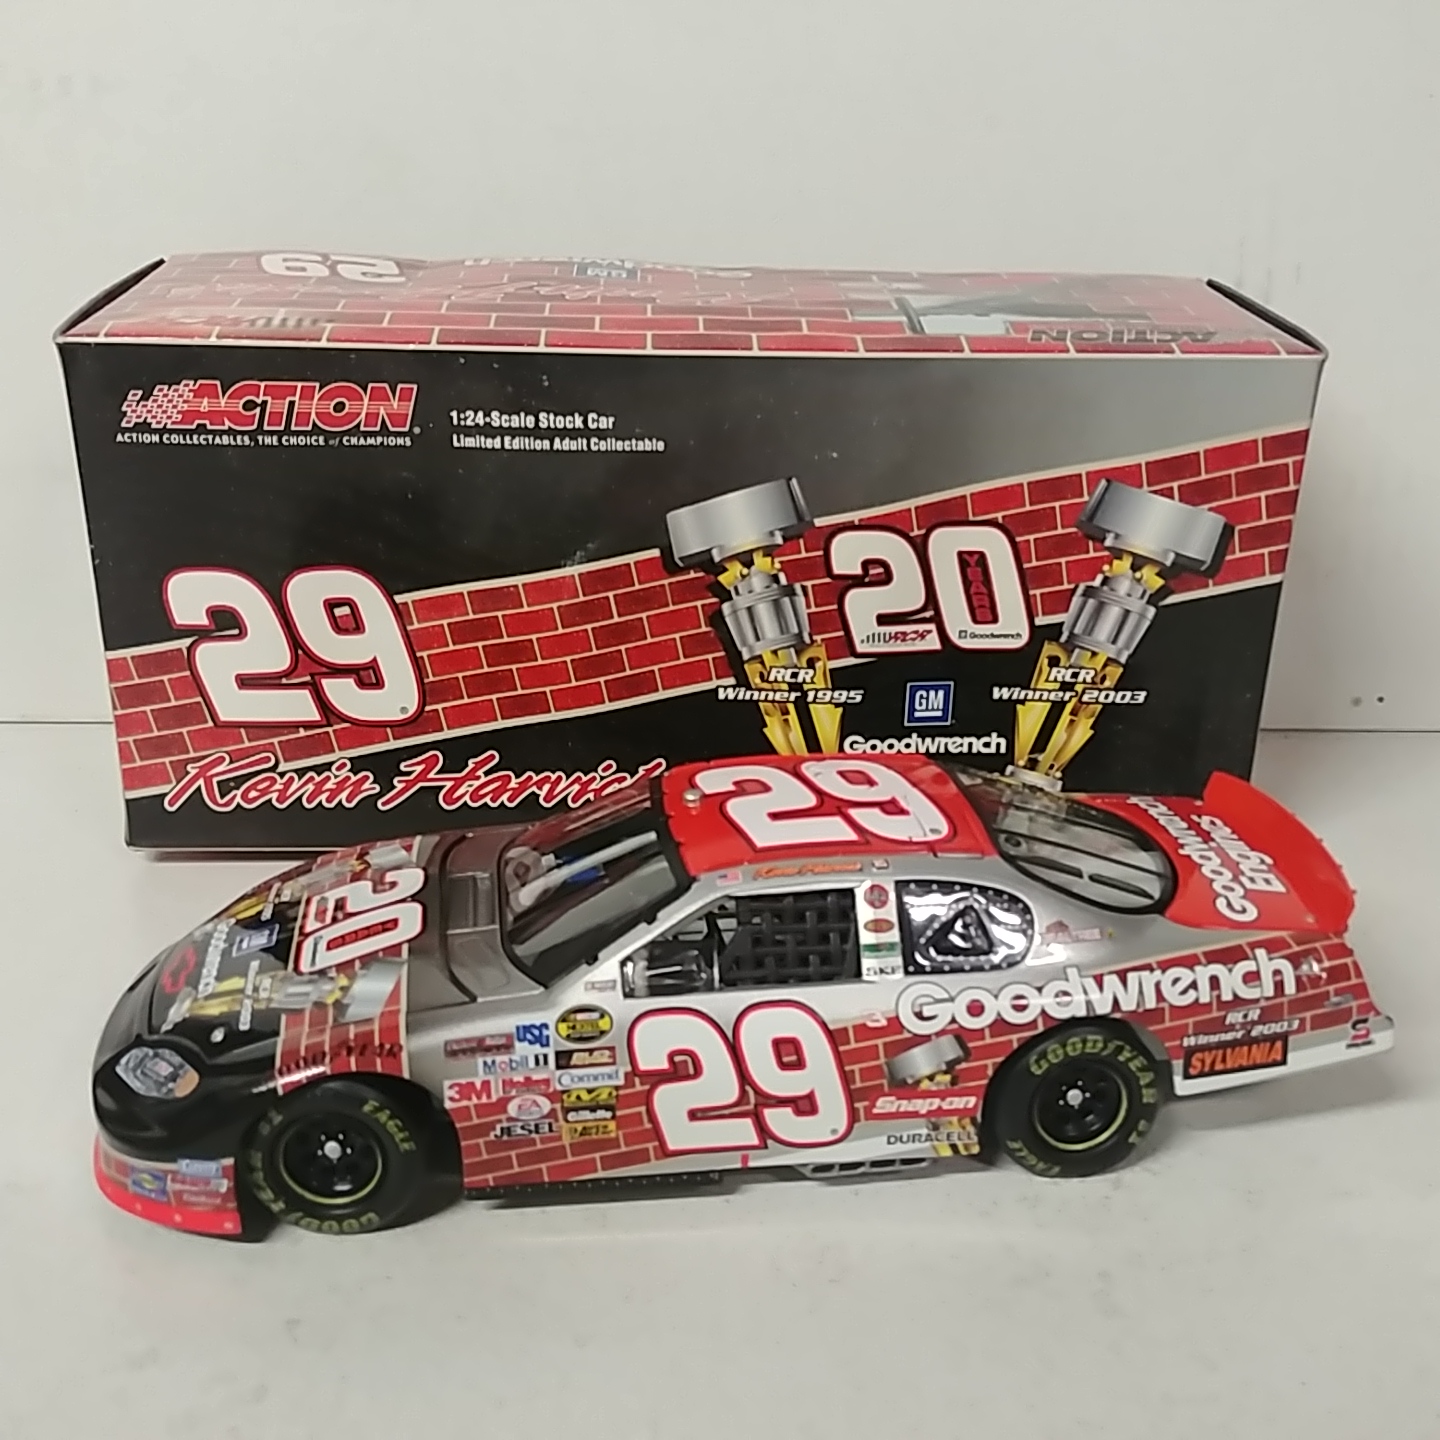 2005 Kevin Harvick 1/24th GM Goodwrench "Indy Special" c/w car